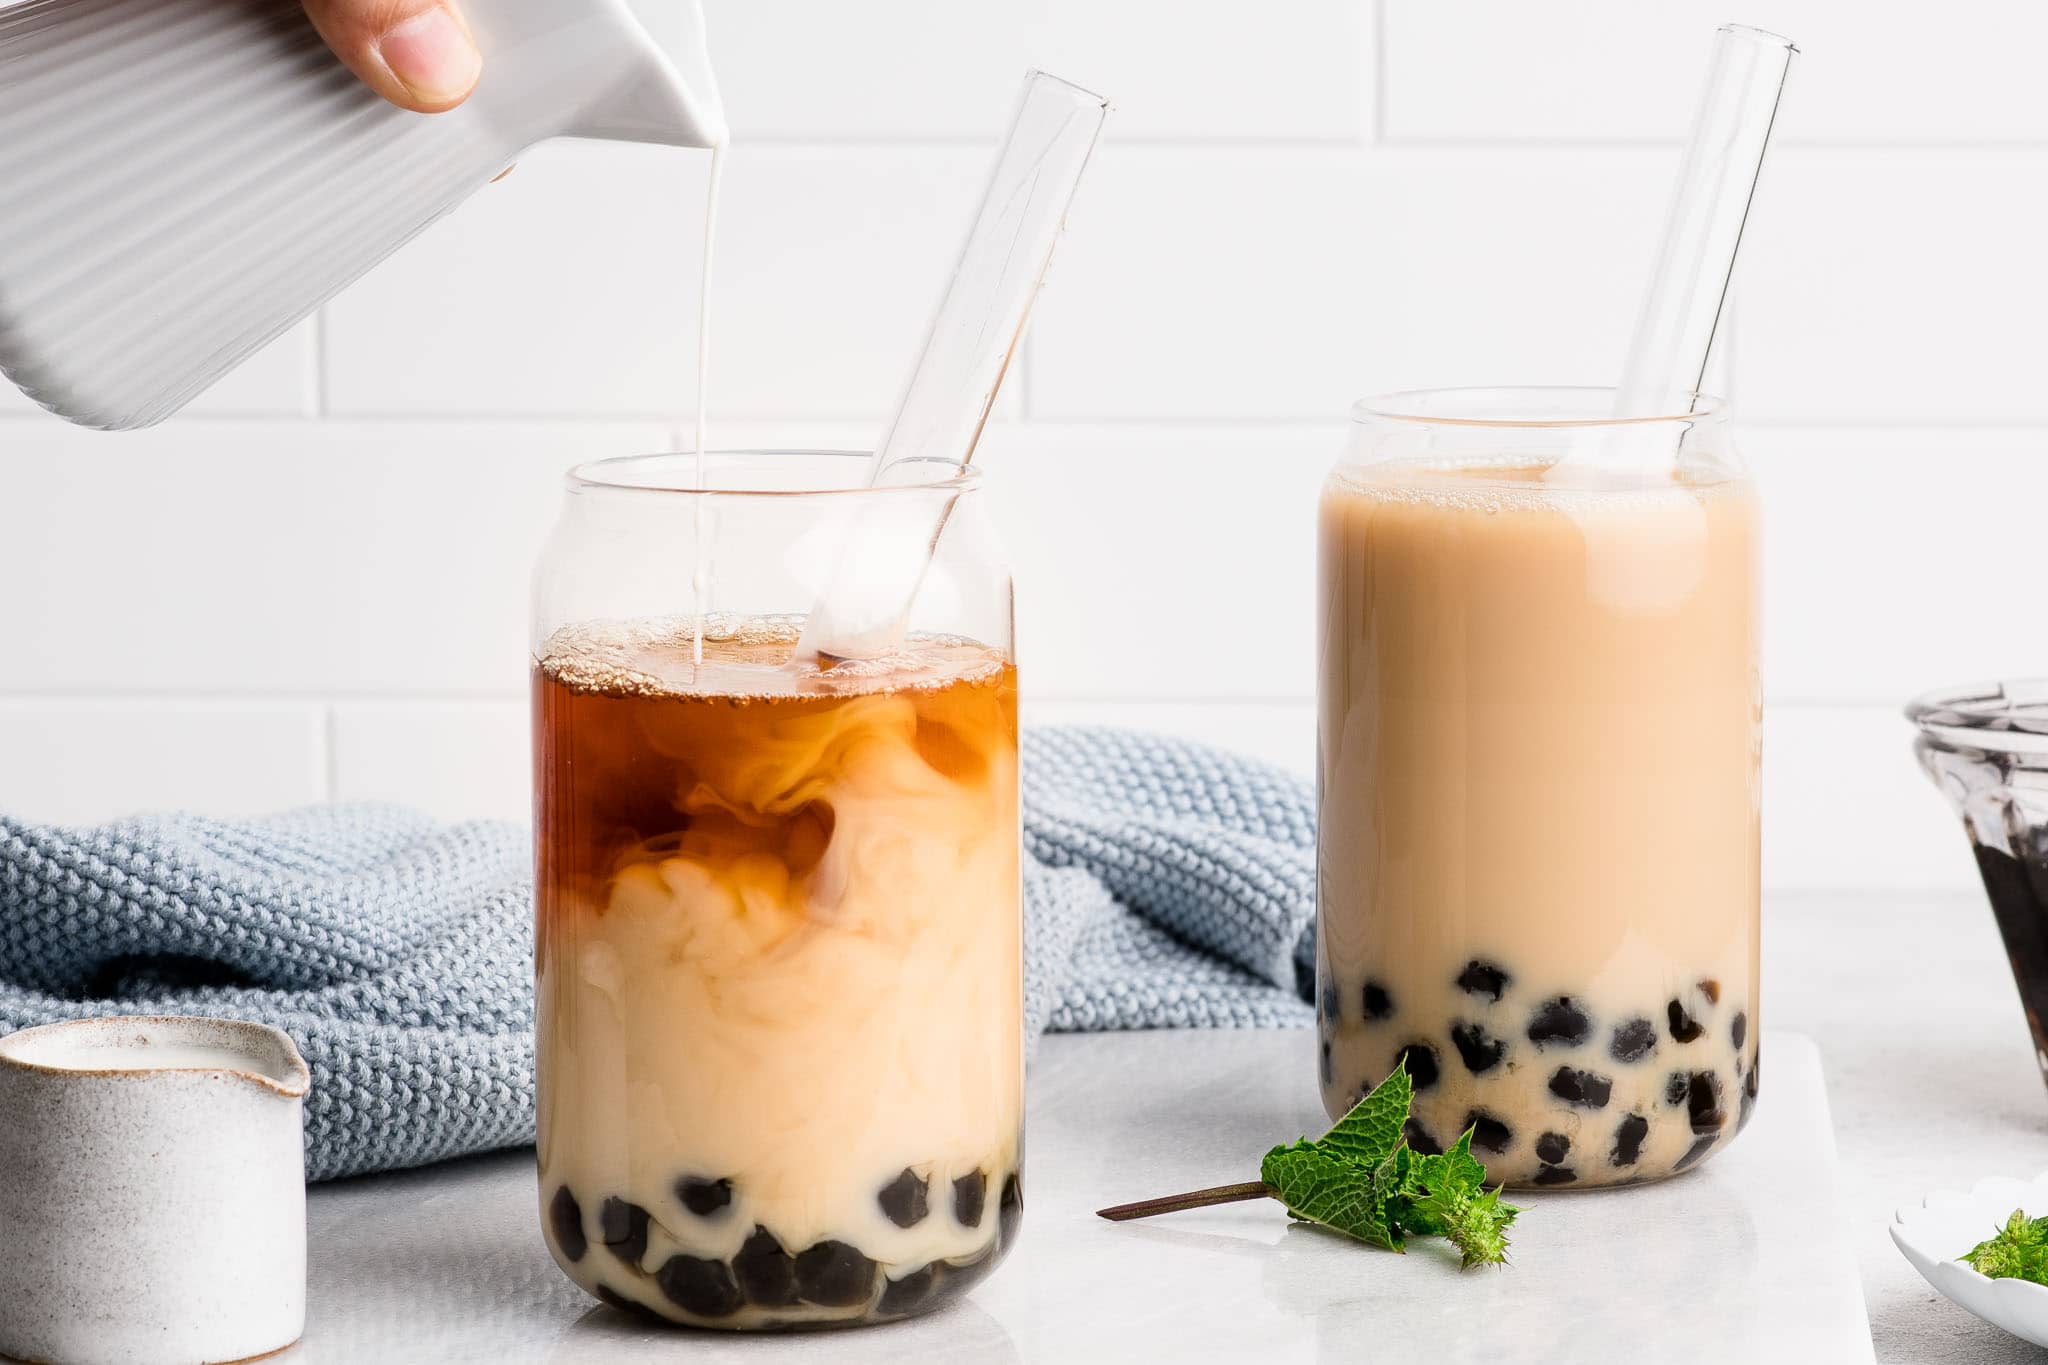 How to Make Bubble Tea Without Crystals